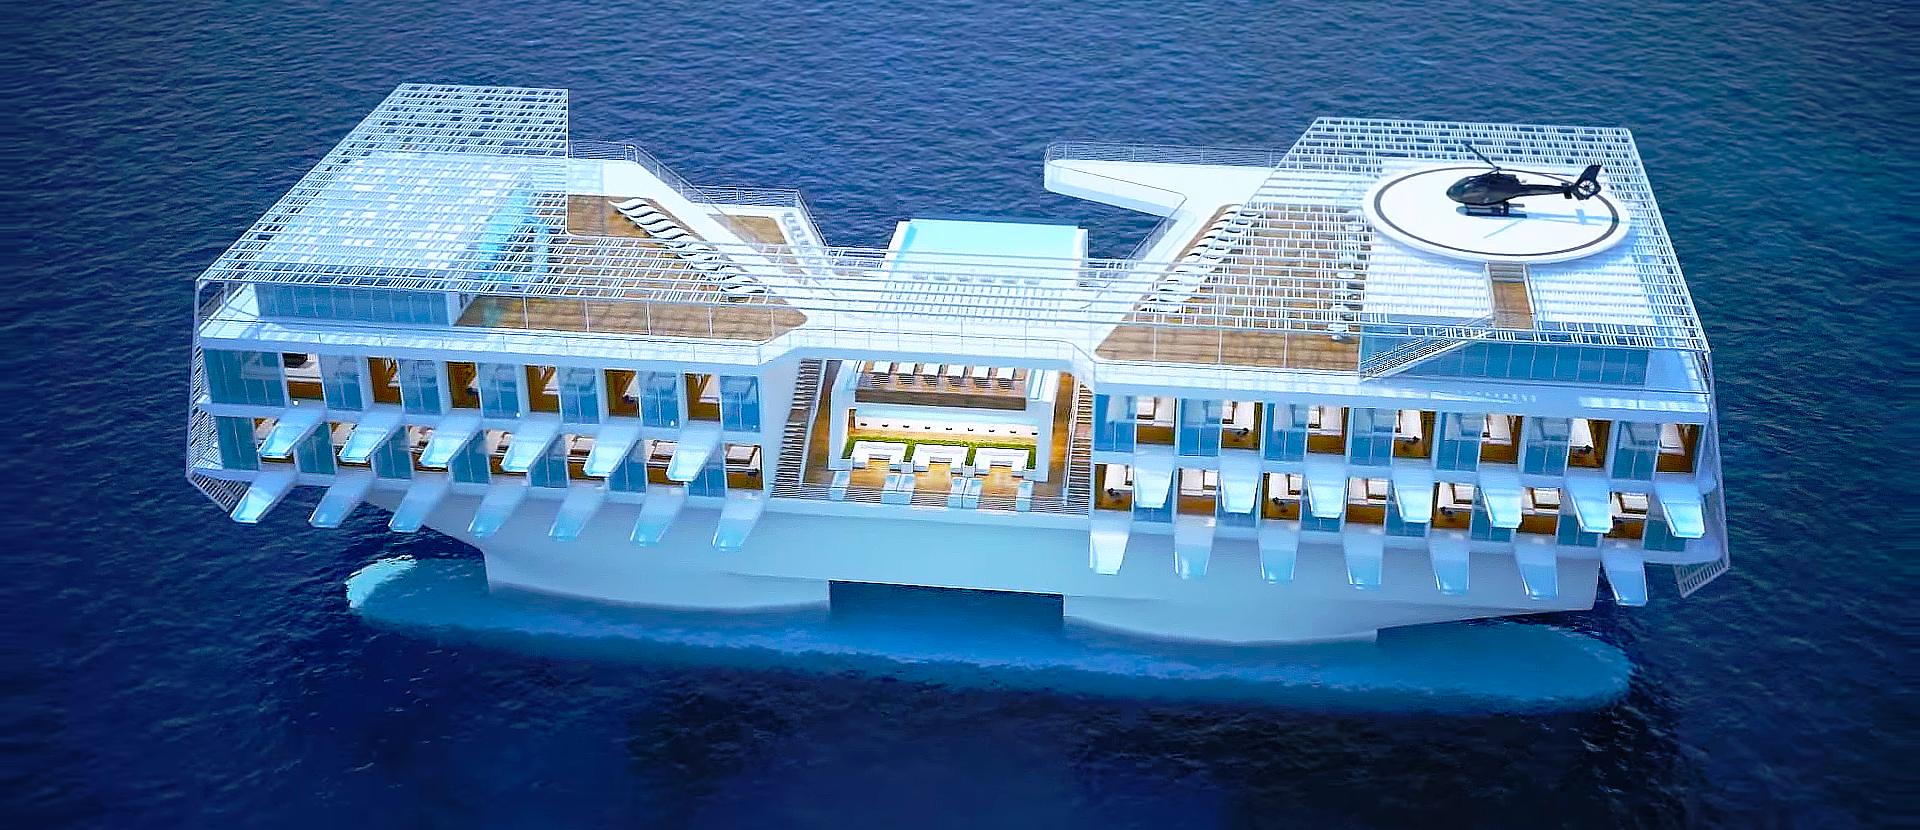 This still image from Trinity's photorealistic architectural rendering displays the 3D modeled resort from a clear aerial view. Ocean water is simulated surrounding the yacht.